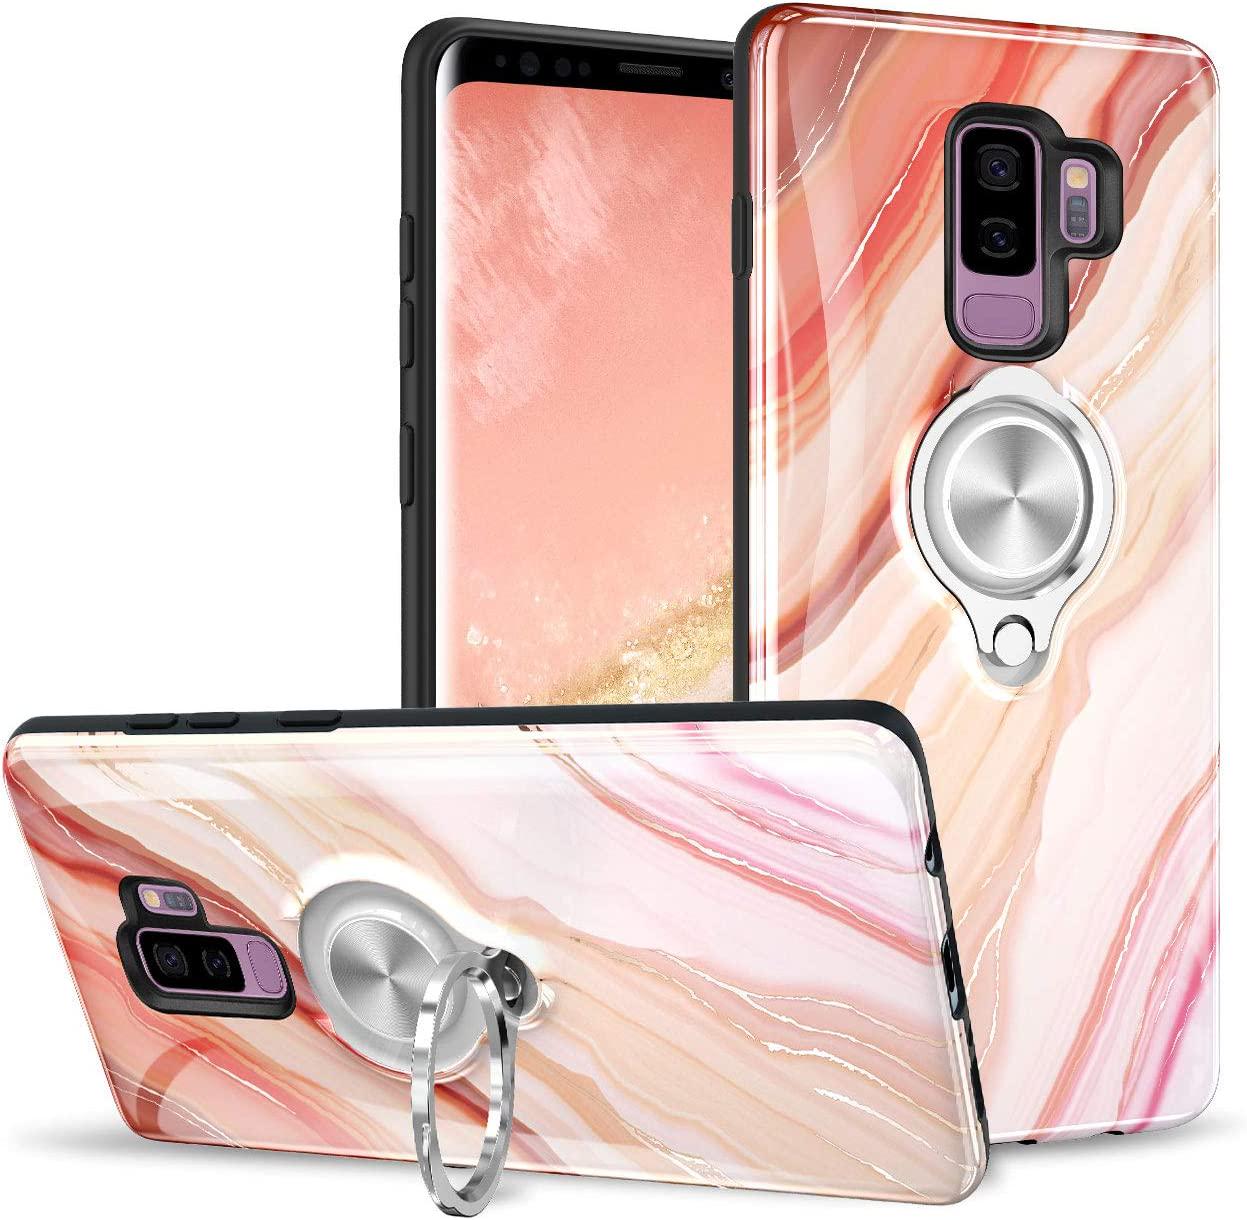 eSamcore, eSamcore Galaxy S9 Plus Case - Luxury Marble Ring Holder Phone Cases + Vent Car Phone Mount for Samsung Galaxy S9+ 6.2 Inch [Coral Red]